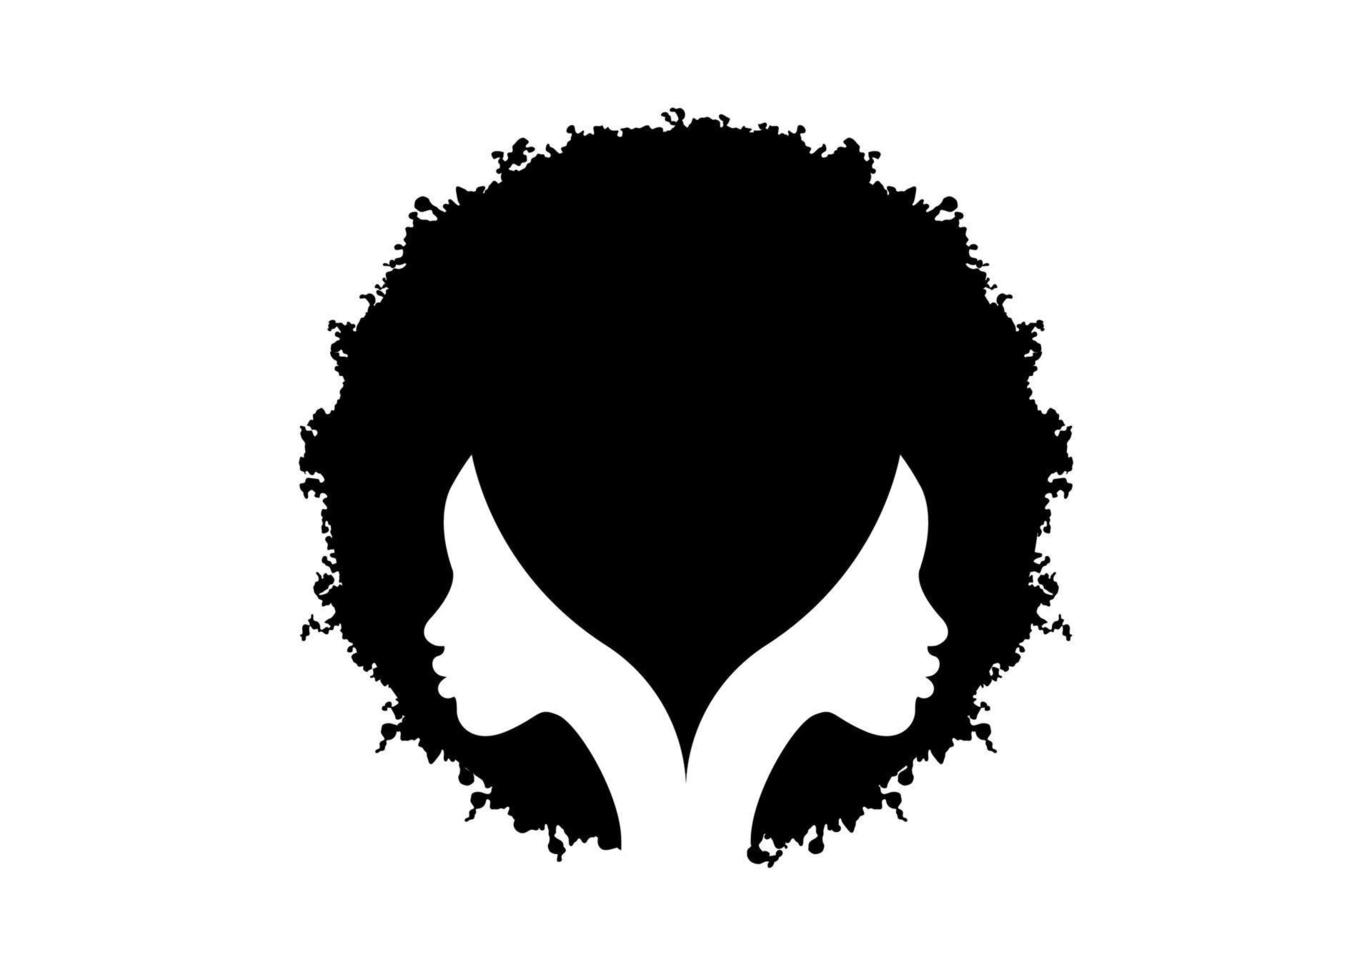 logo round design African american woman face profile with black curly afro hair. Women profile hairstyle silhouette on the white background. Vector illustration isolated